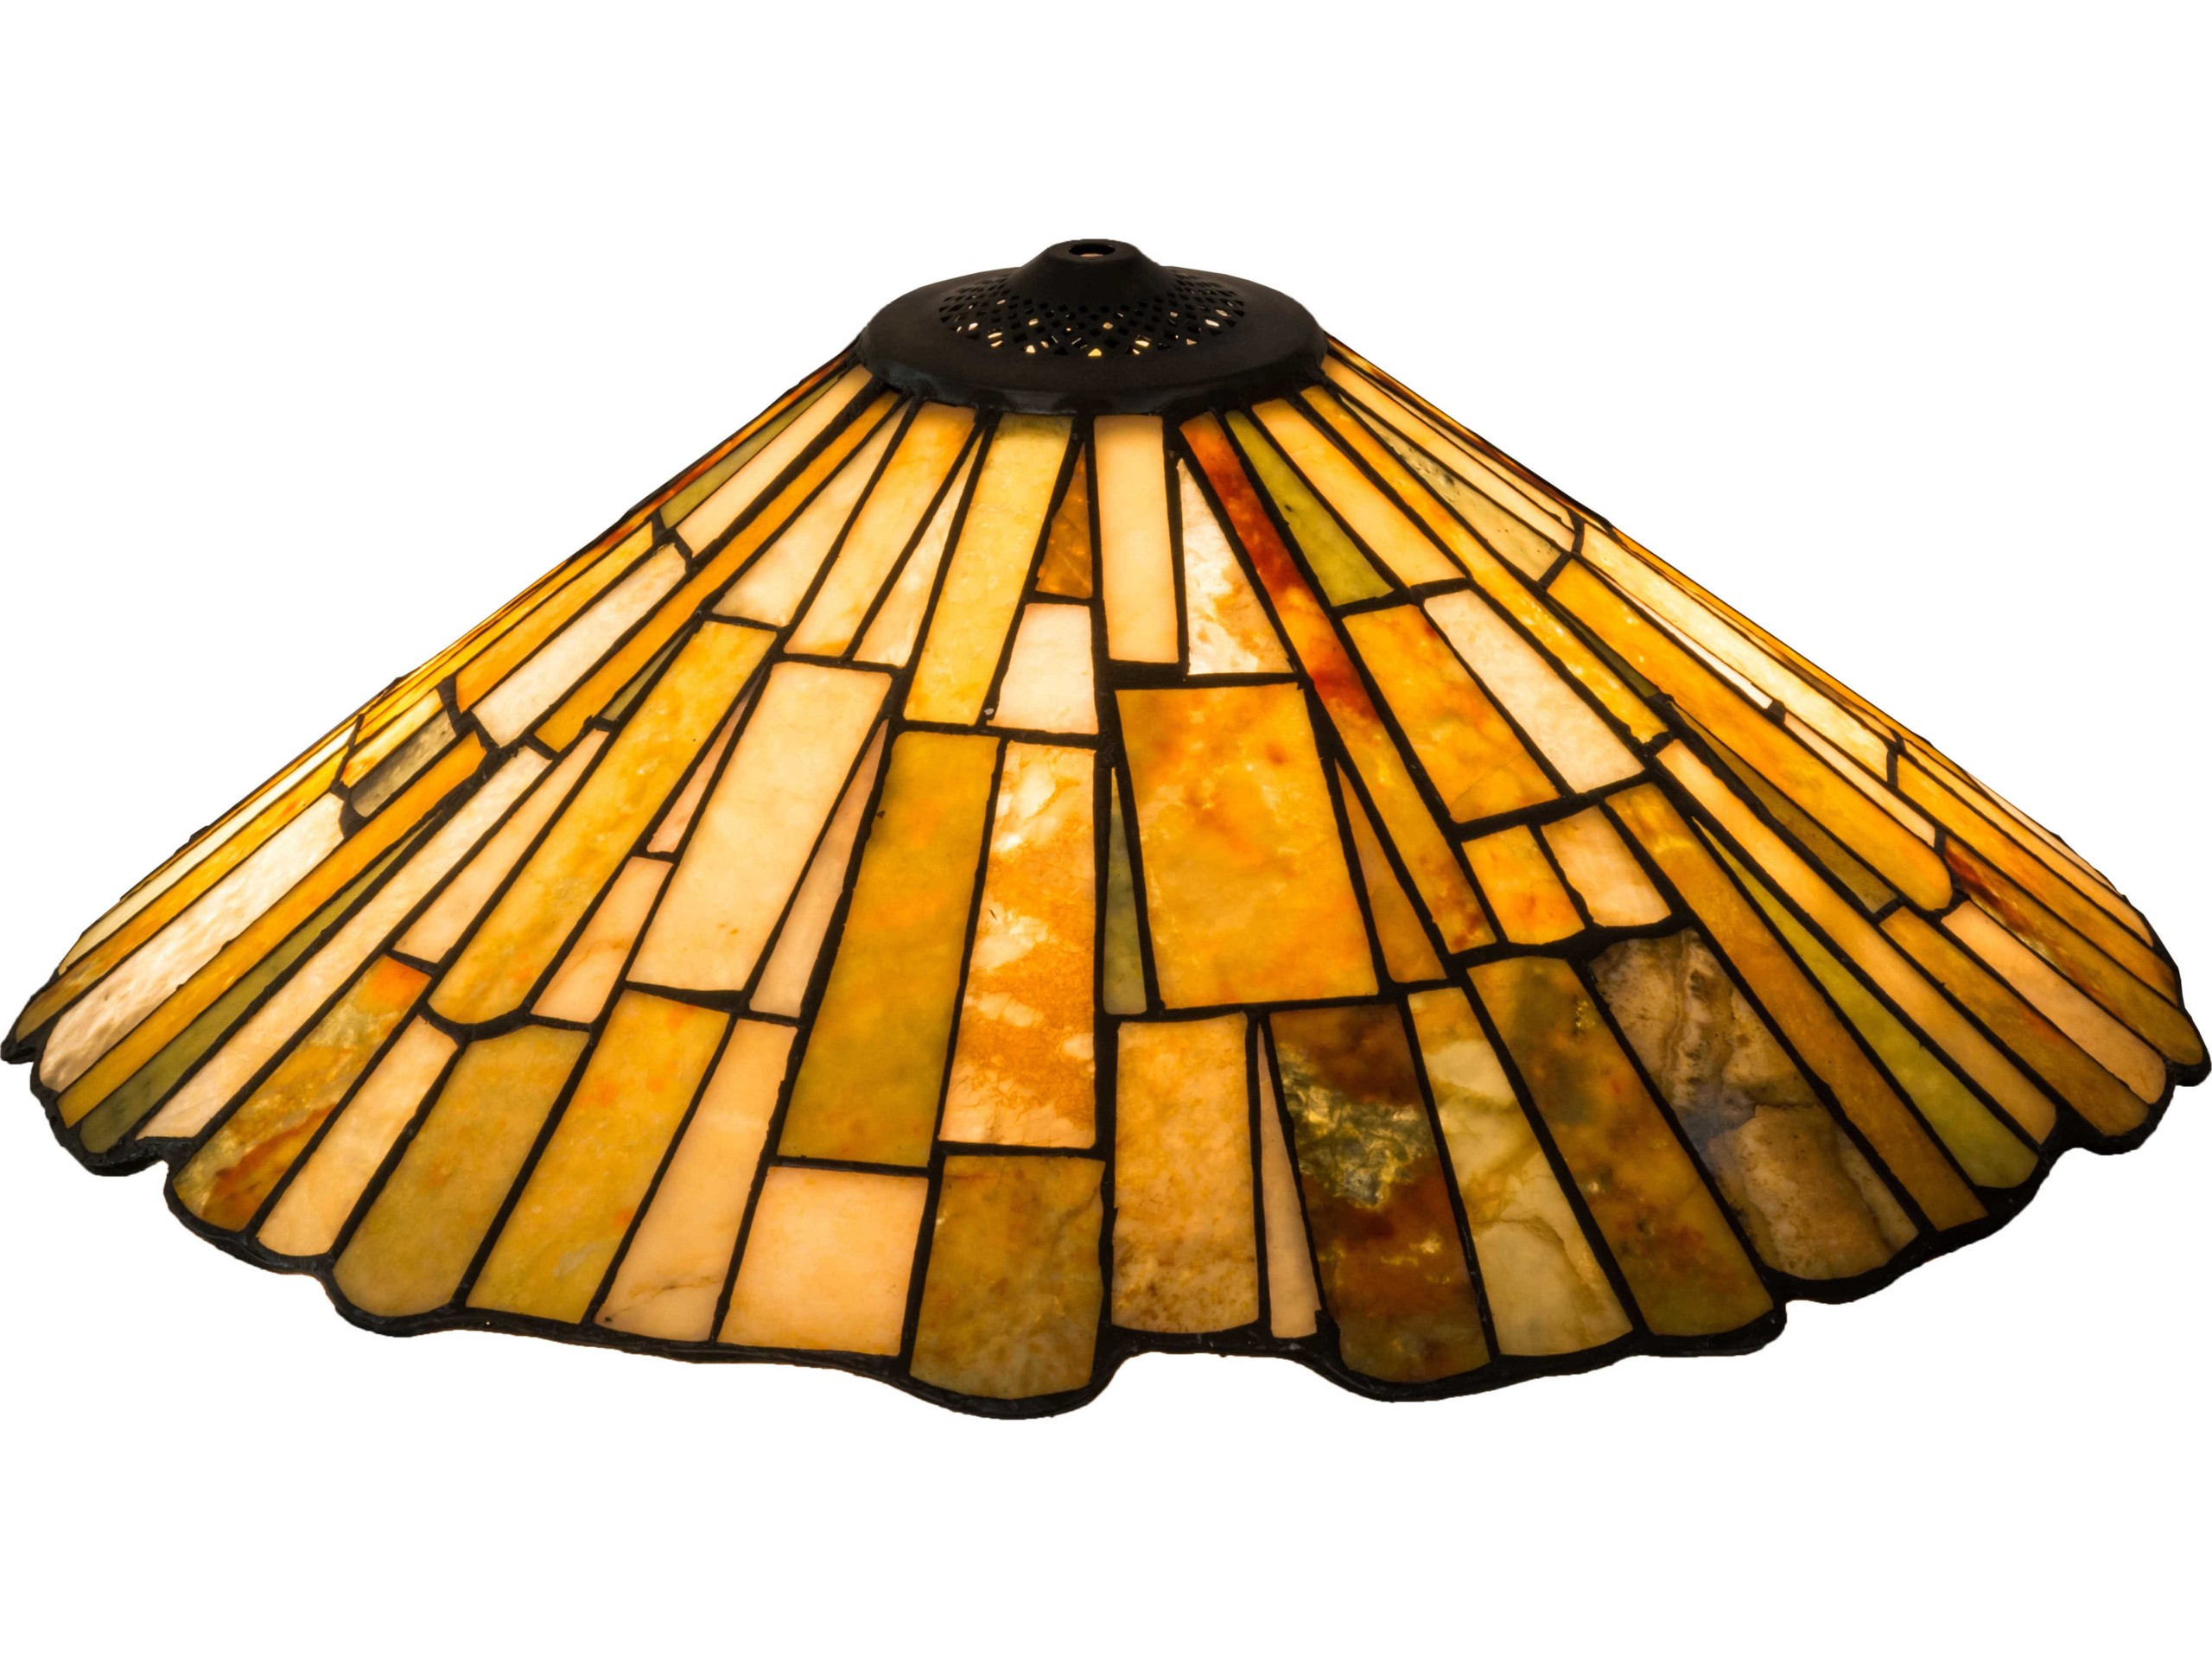 Meyda Home Decorative Art Stained Glass Lamp Fixture21"W Delta Jadestone Replacement Shade